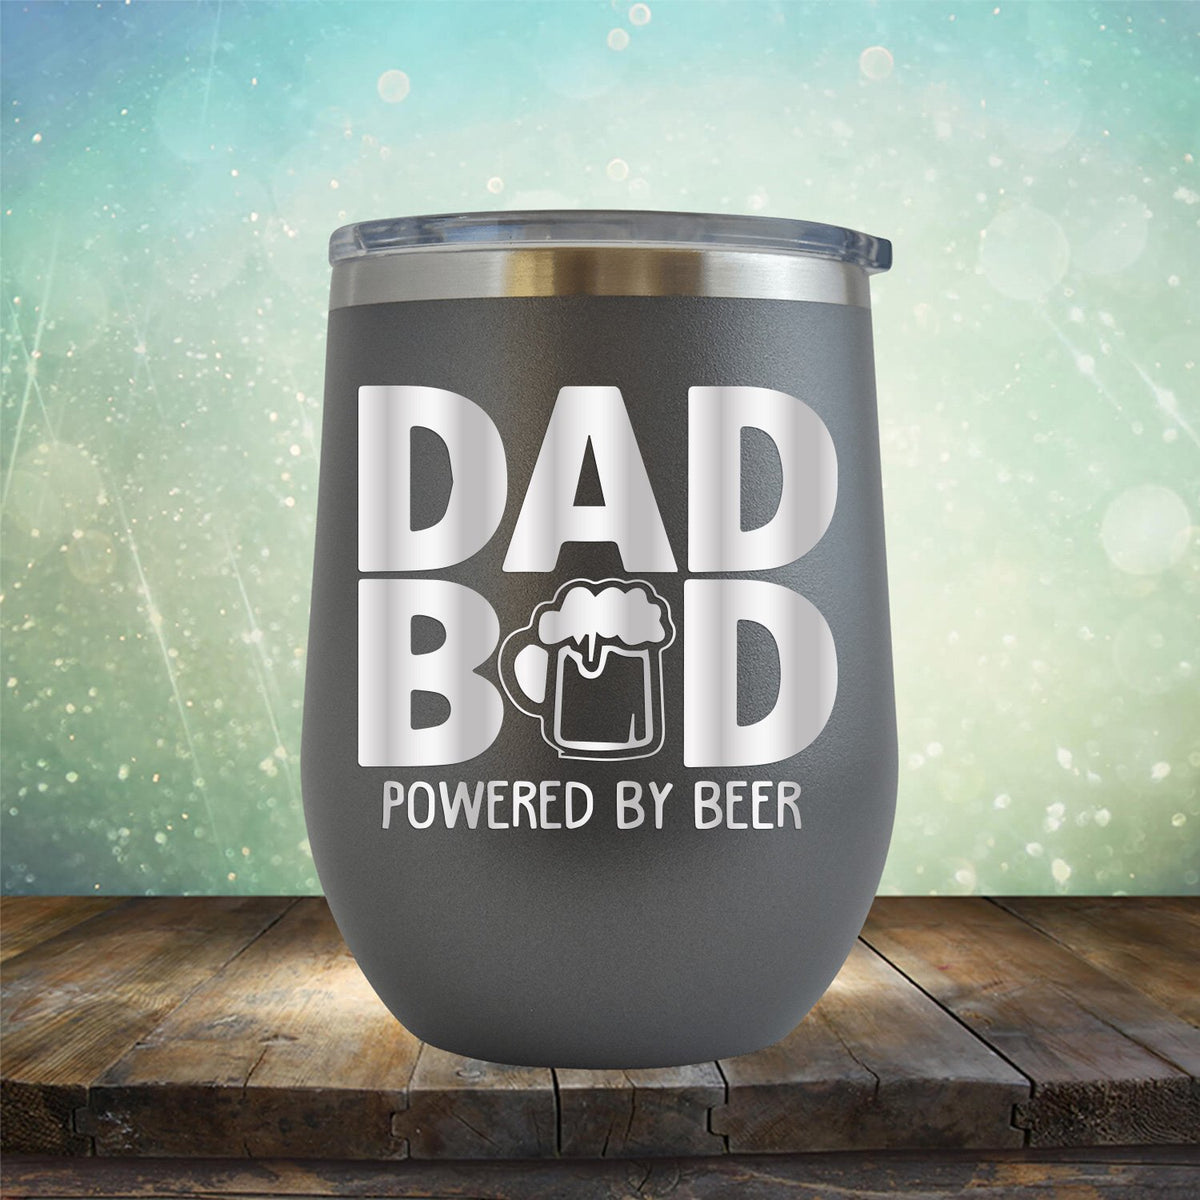 Dad Bod Powered by Beer - Stemless Wine Cup